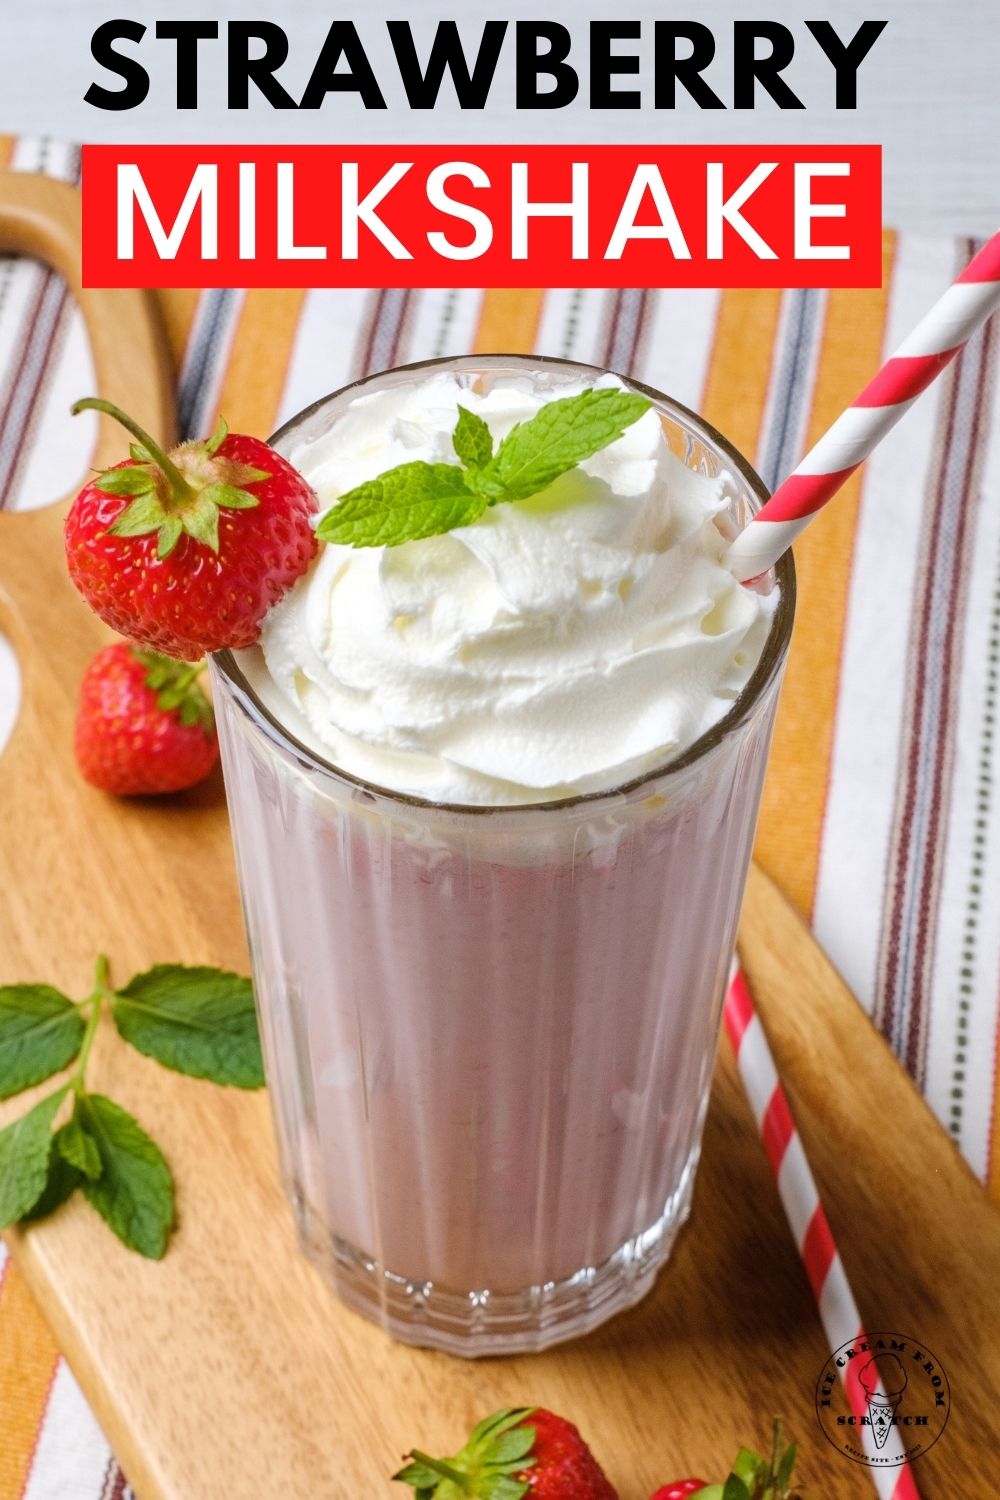 a ridged clear glass filled with strawberry milkshake, garnished with whipped ream, mint, strawberries, and a red and white straw. The title is at the top of the image in black and red letters.